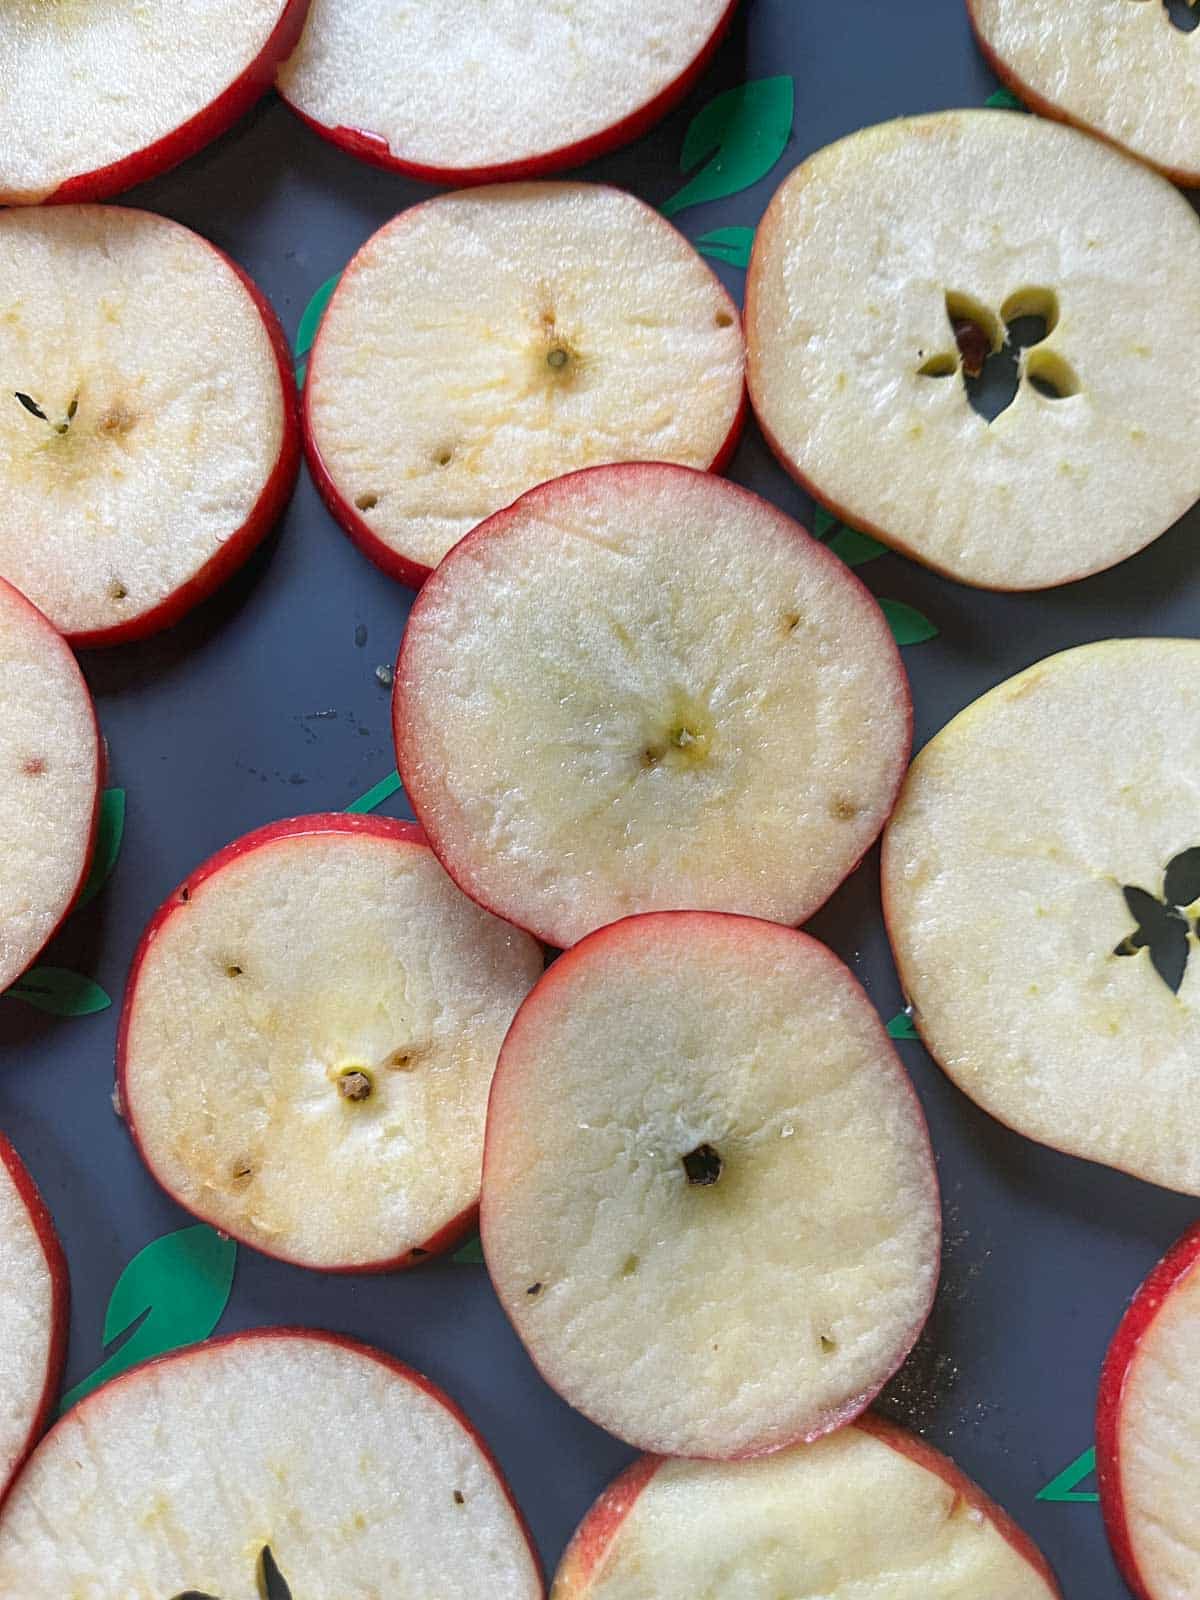 sliced apples on freeze dryer tray